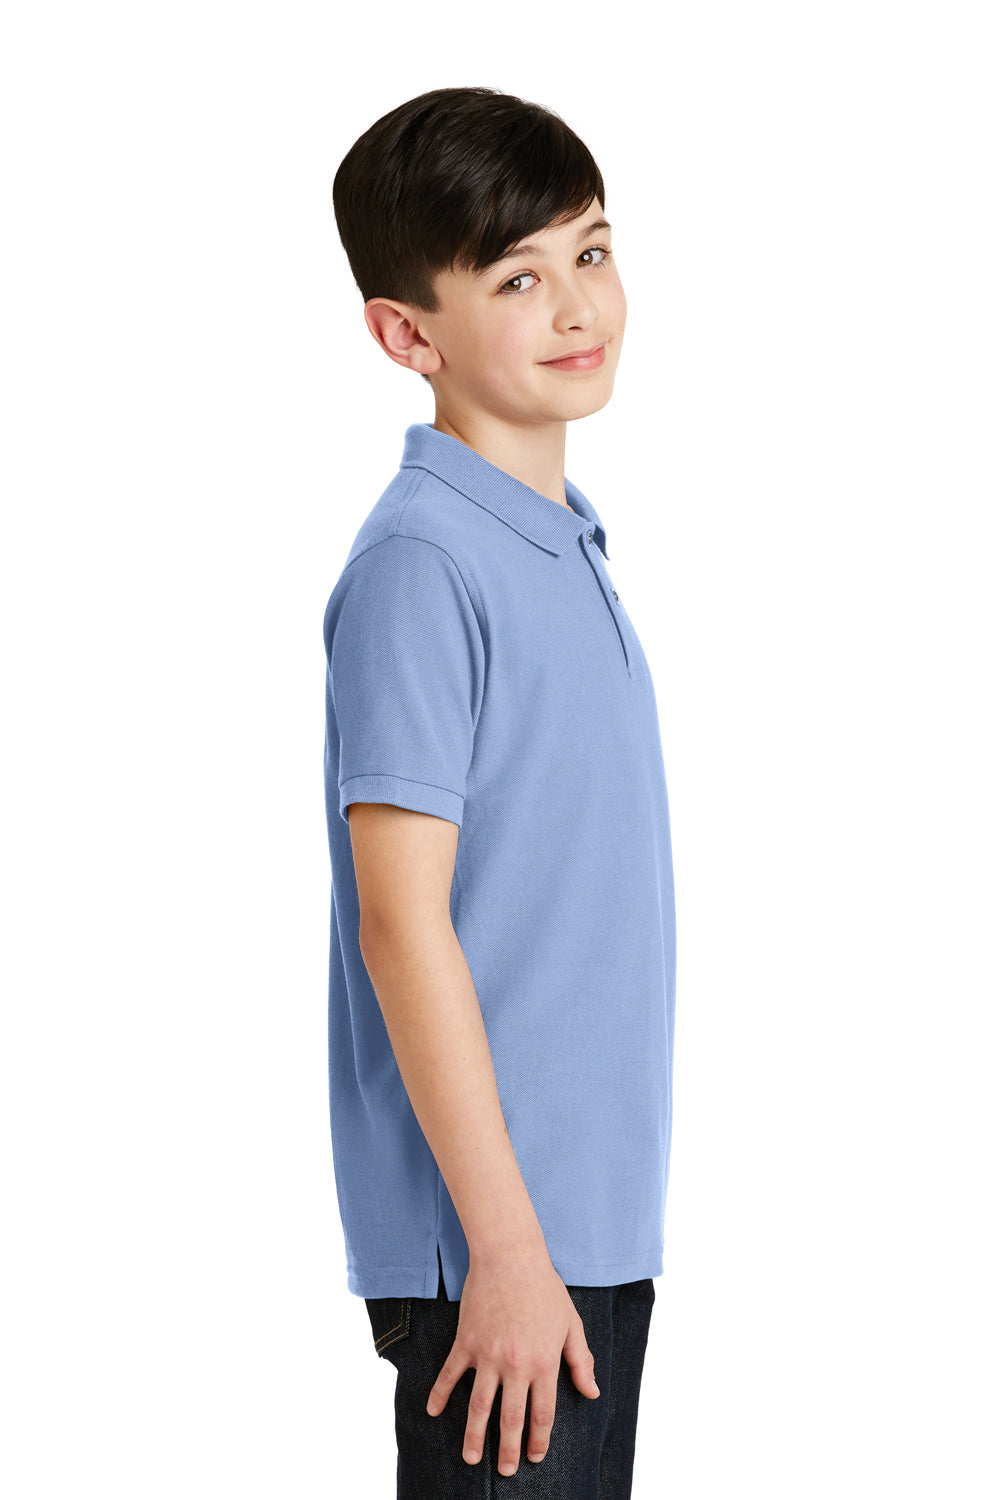 Port Authority Y500 Youth Silk Touch Wrinkle Resistant Short Sleeve Polo Shirt Light Blue Side